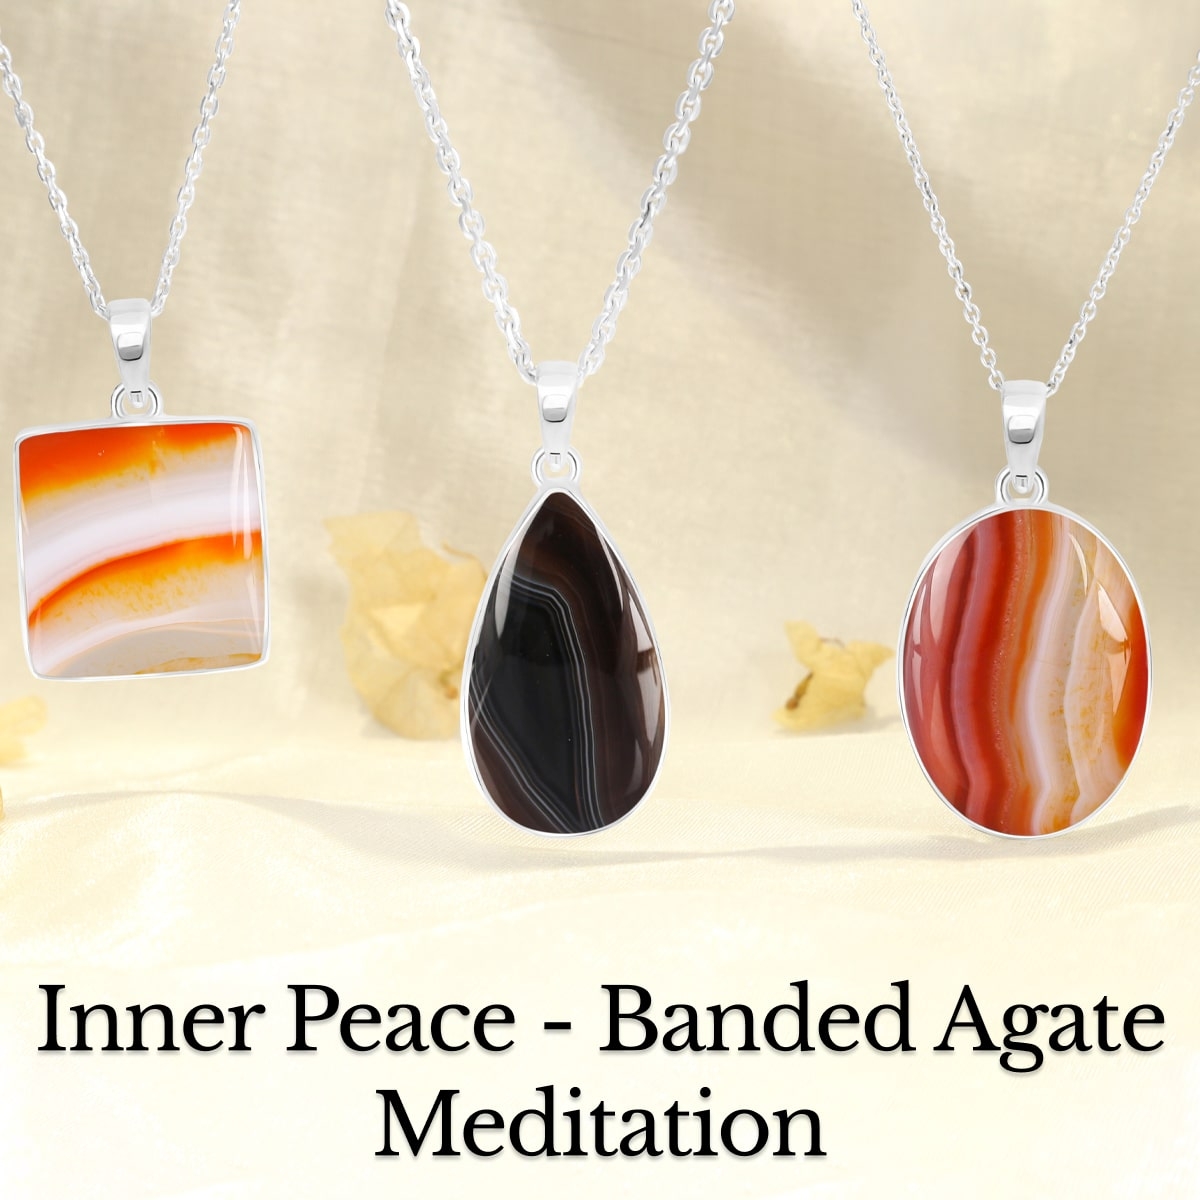 Banded Agate Meditation and Grounding